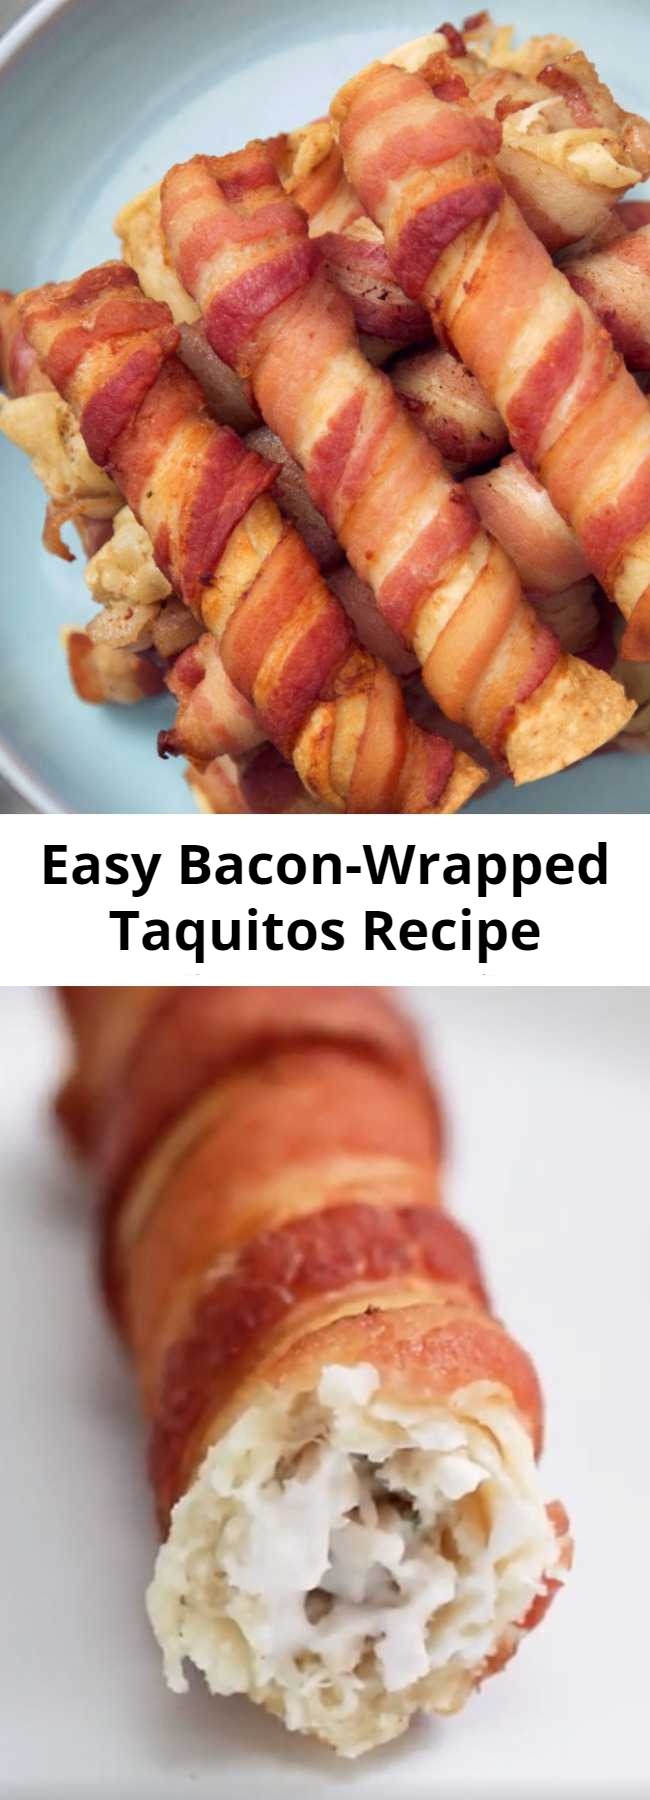 Easy Bacon-Wrapped Taquitos Recipe - Ordinary chicken taquitos are fine, but an extra wrapping of bacon is like trying them again, for the first time.